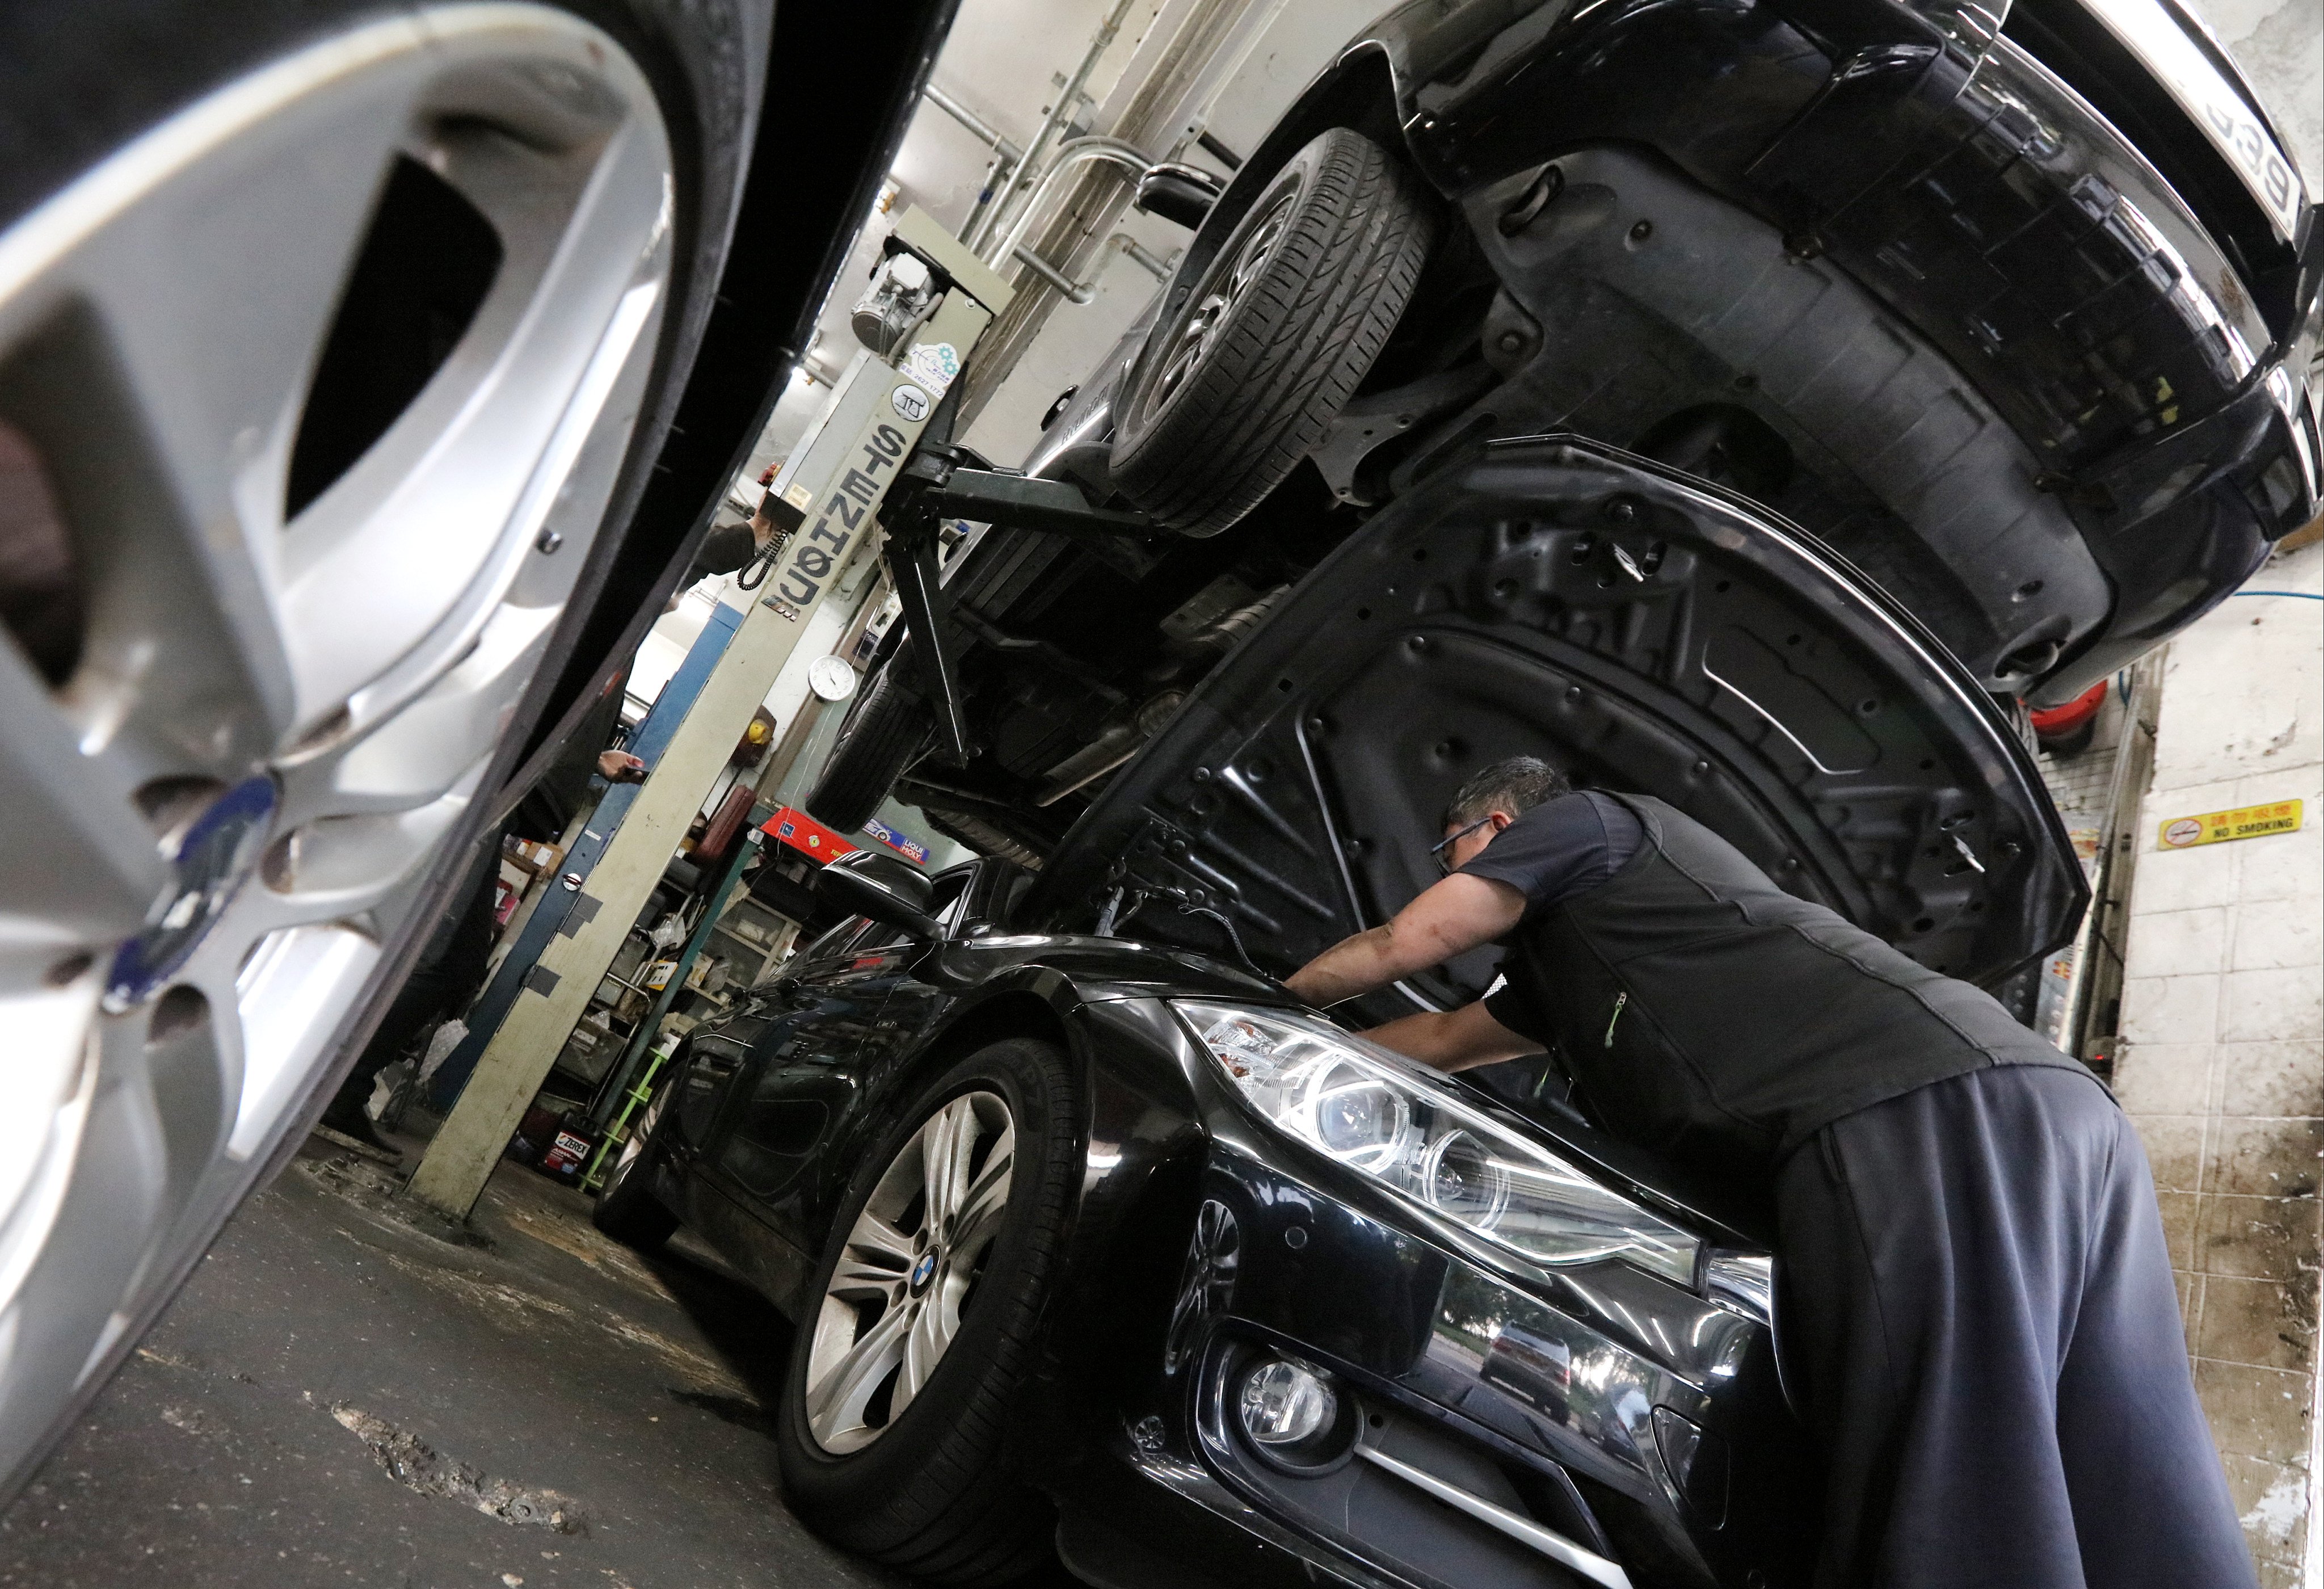 Seven dealers of 17 car brands have proposed easing warranty restrictions on repair services. Photo: Felix Wong